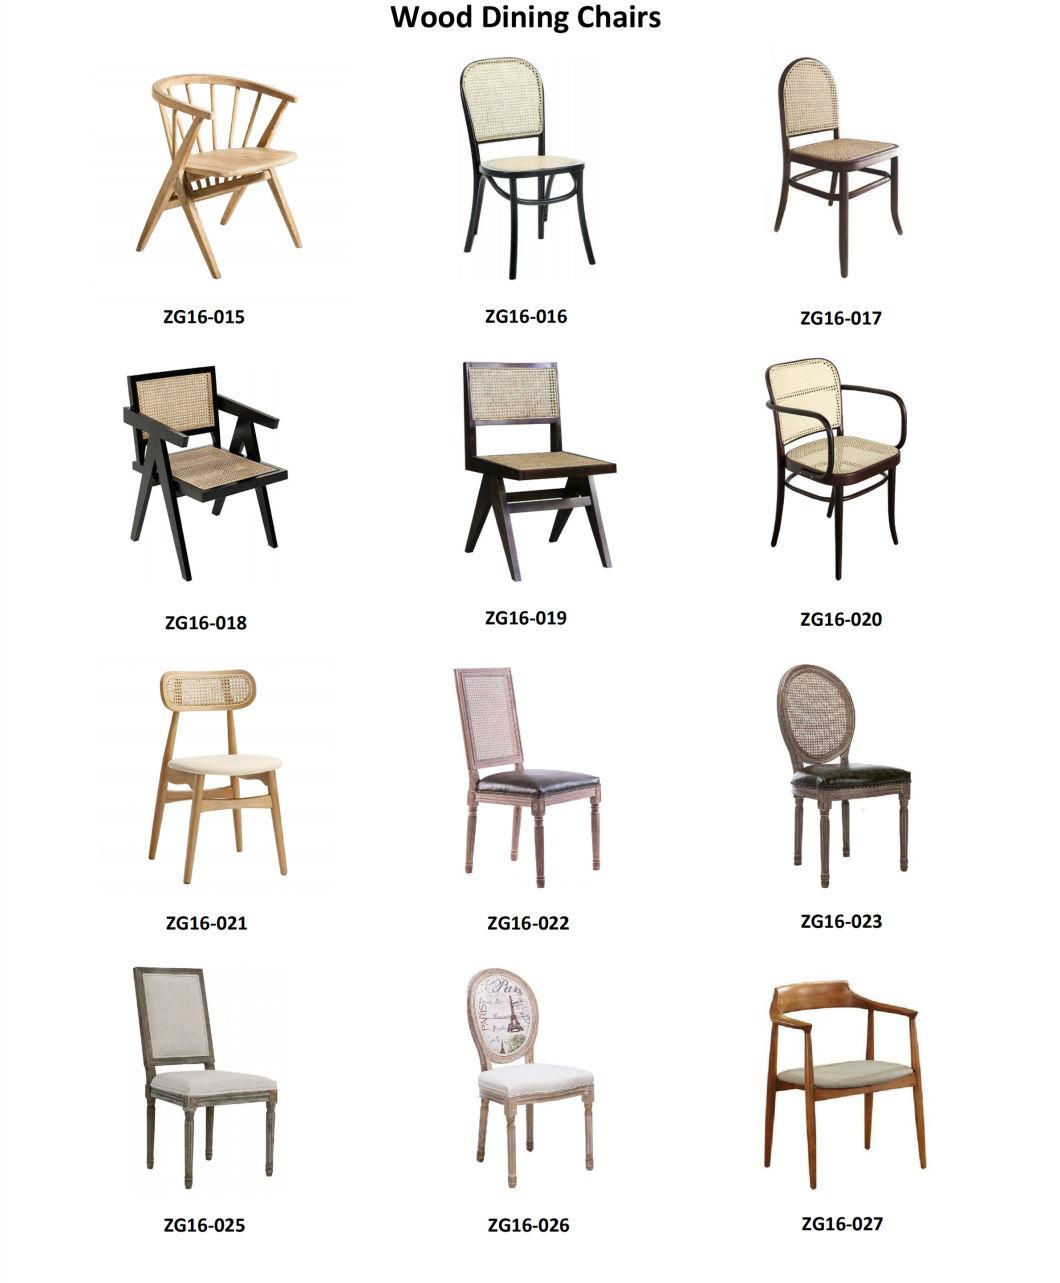 Hot Selling Wood Rattan Dining Chair (ZG16-022)